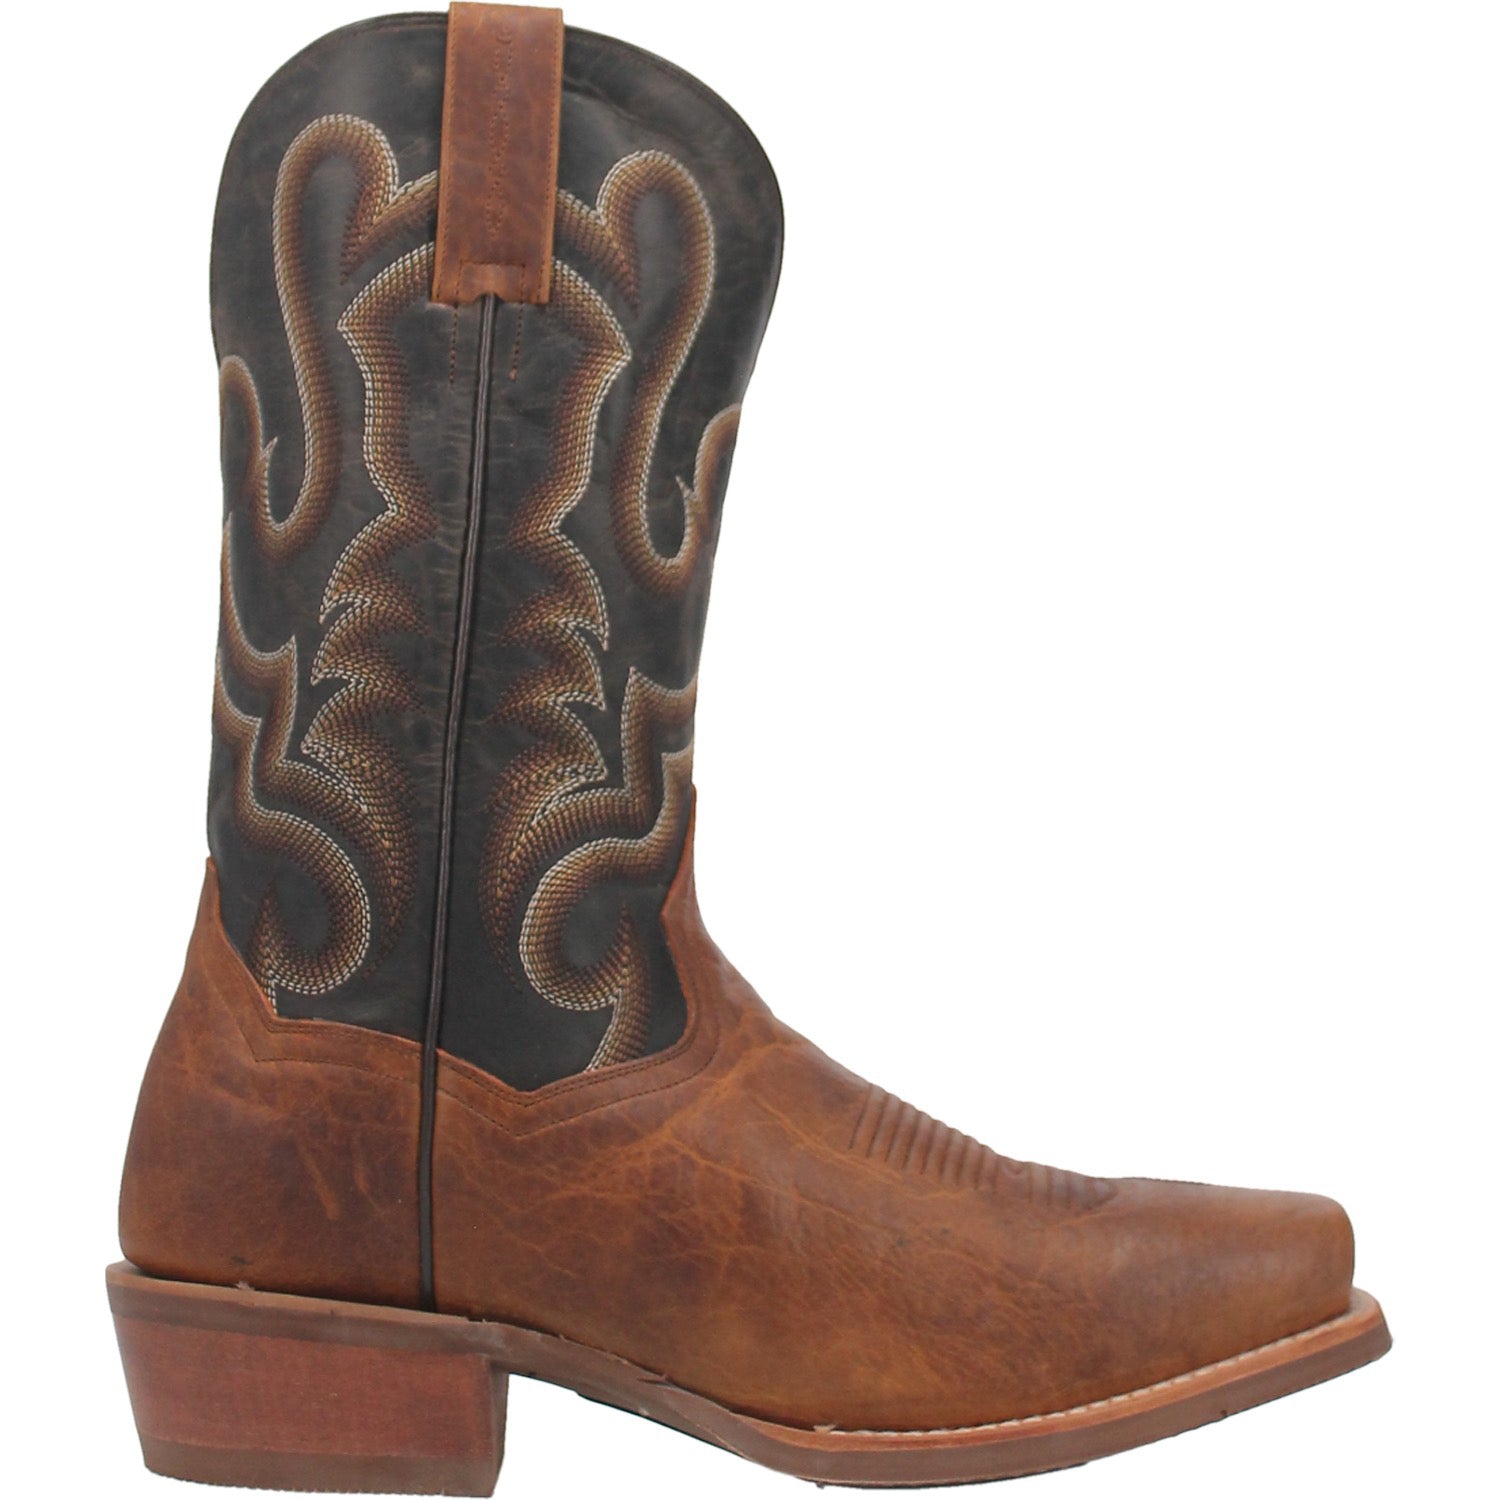 Dan Post Mens Richland Cowboy Boots Leather Saddle – The Western Company